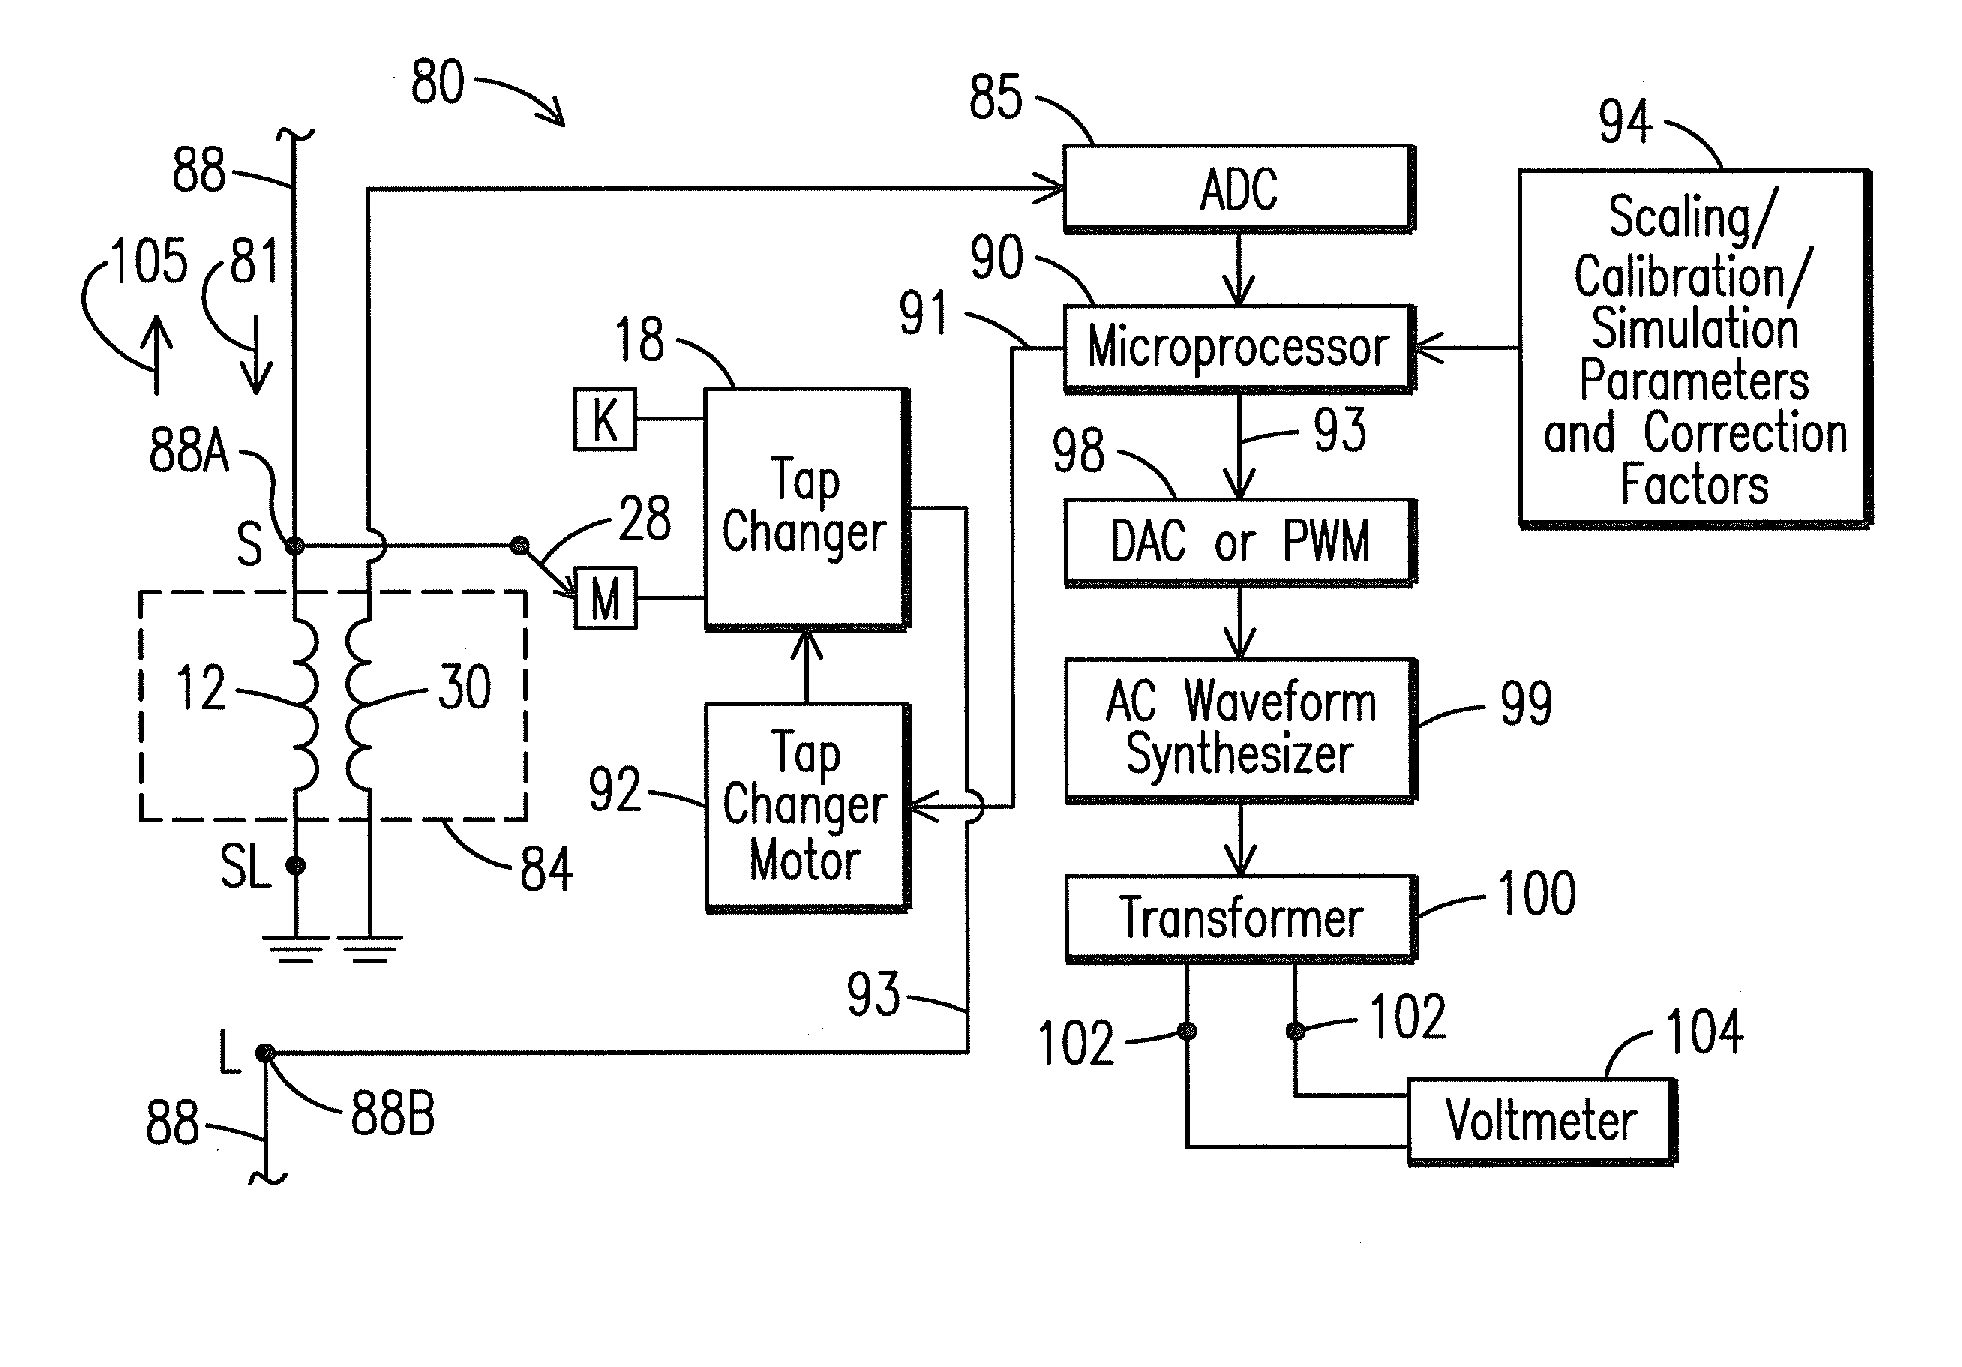 Apparatus and method for generating a metering voltage output for a voltage regulator using a microprocessor